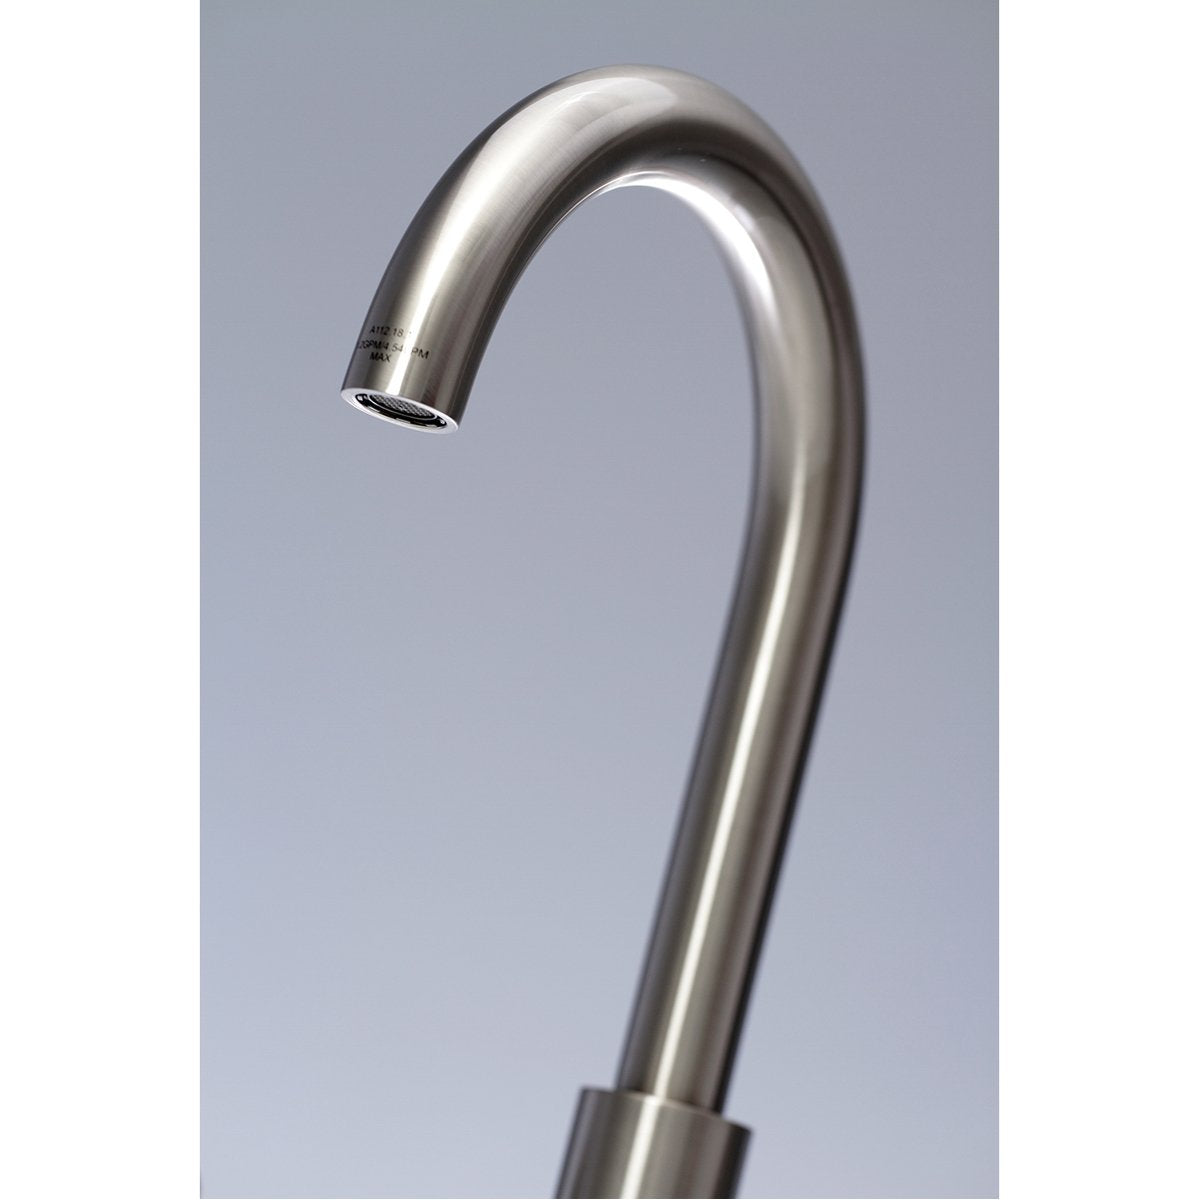 Kingston Brass Fauceture Concord Widespread Cross-Handle Bathroom Faucet